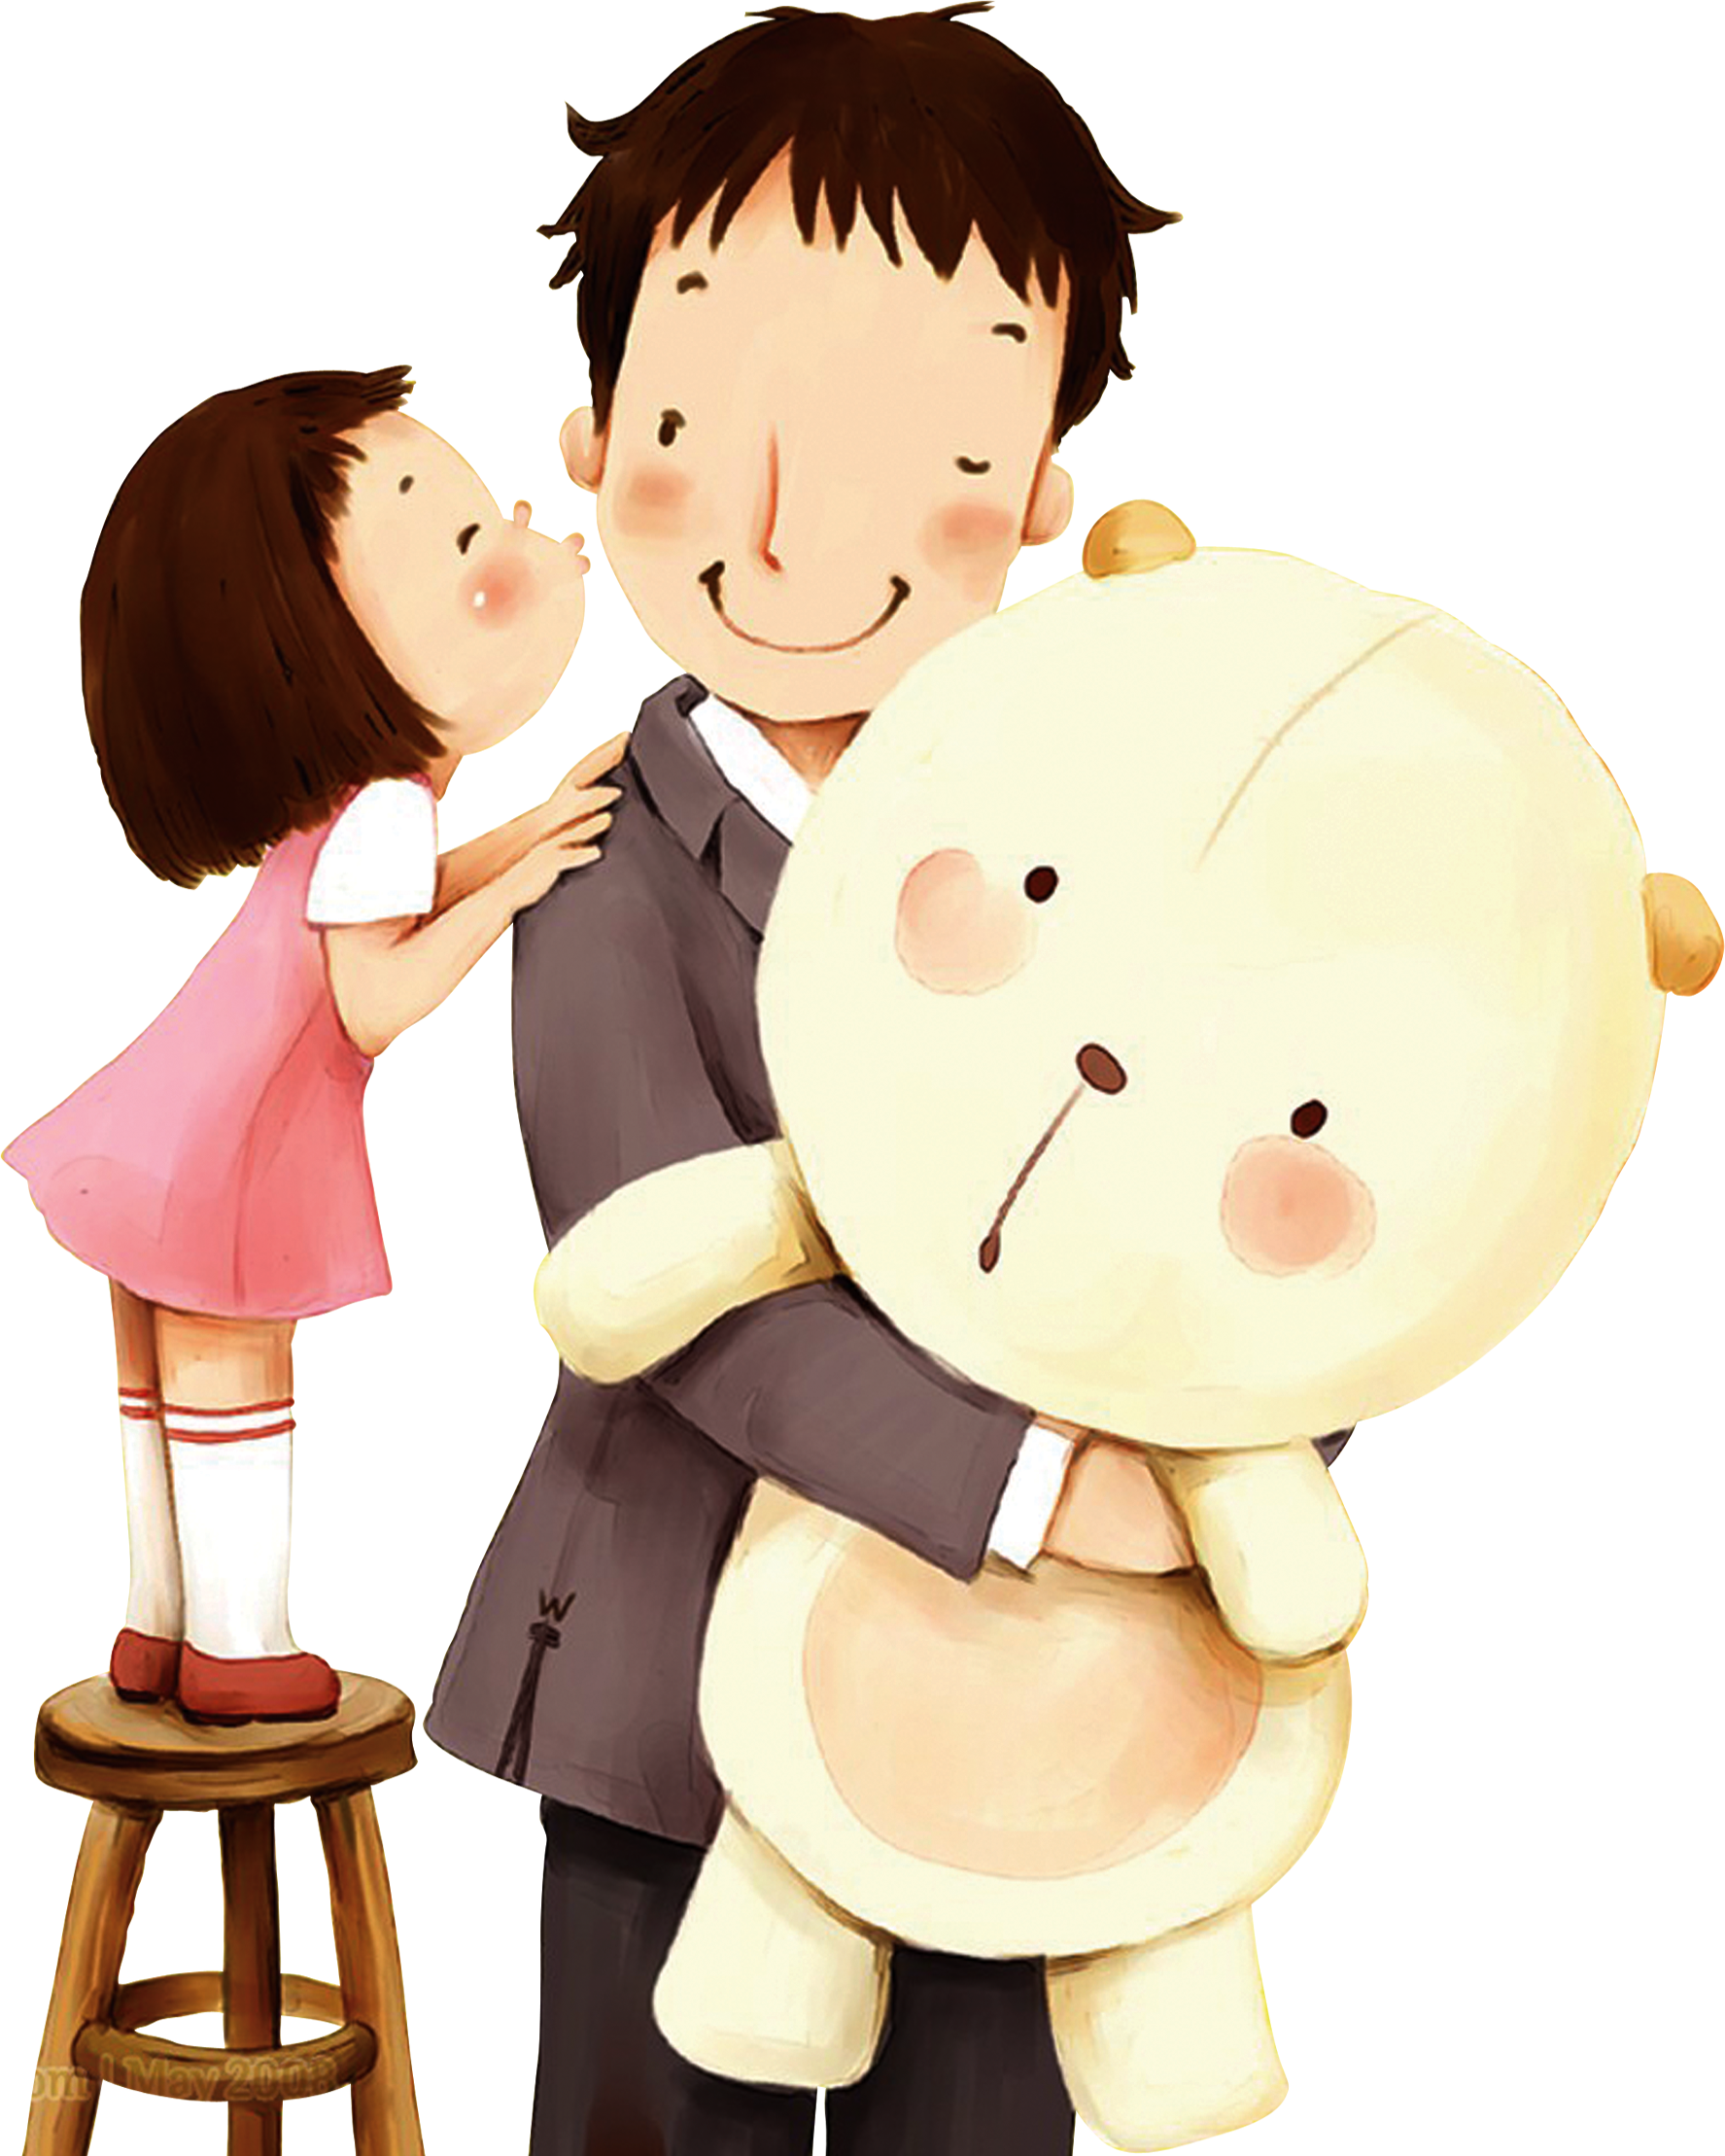 Love Birthday Father Happiness Graphics Free Transparent Image HQ PNG Image